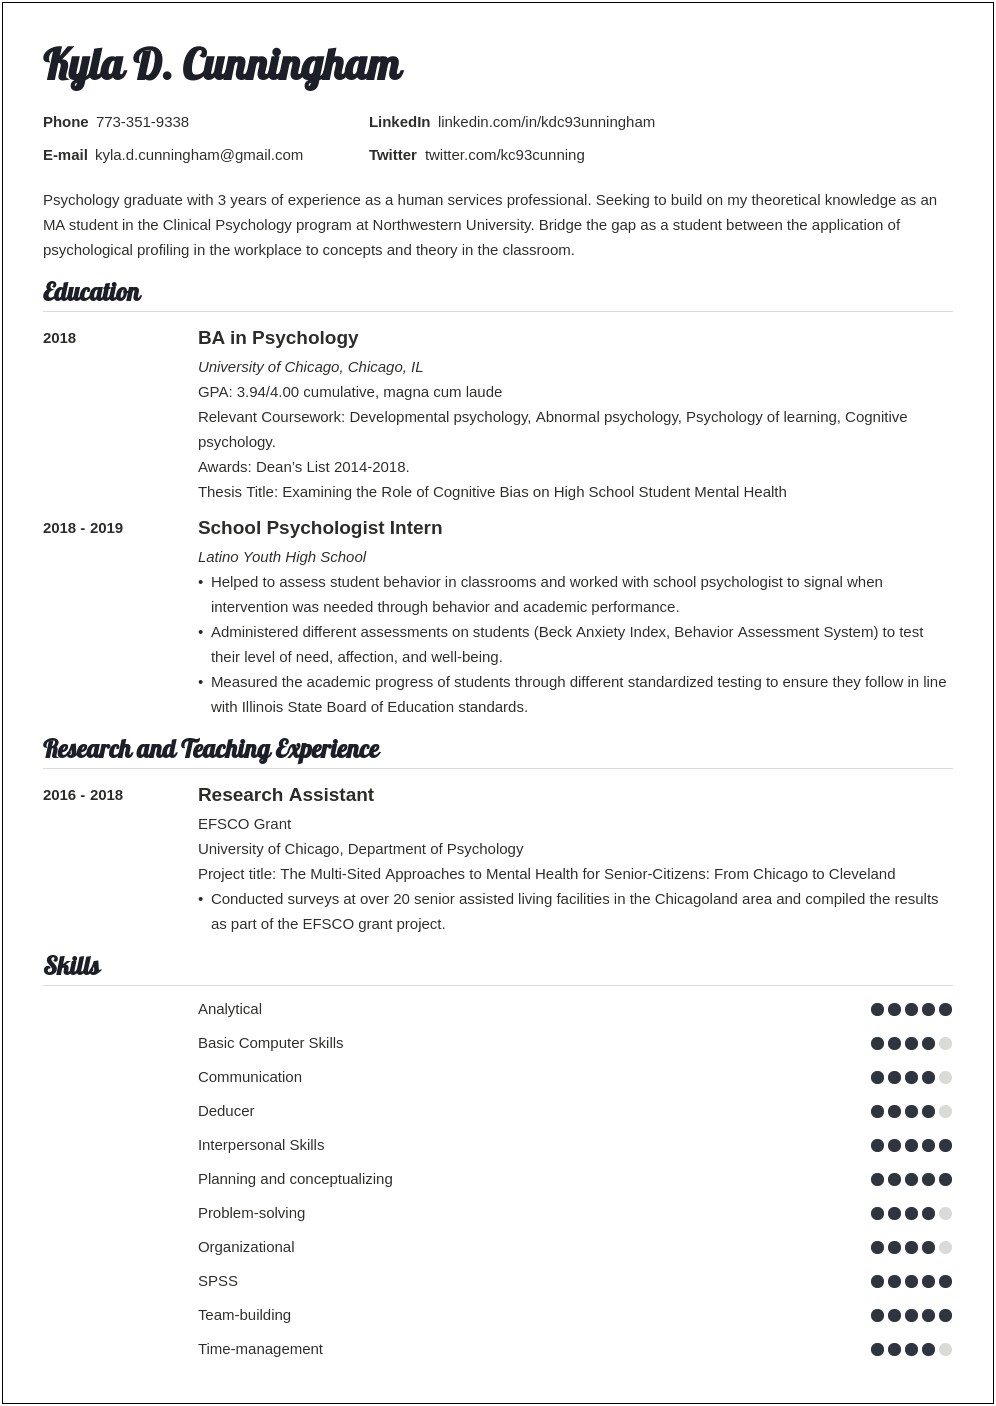 Resume Objective Examples For Psychology Majors